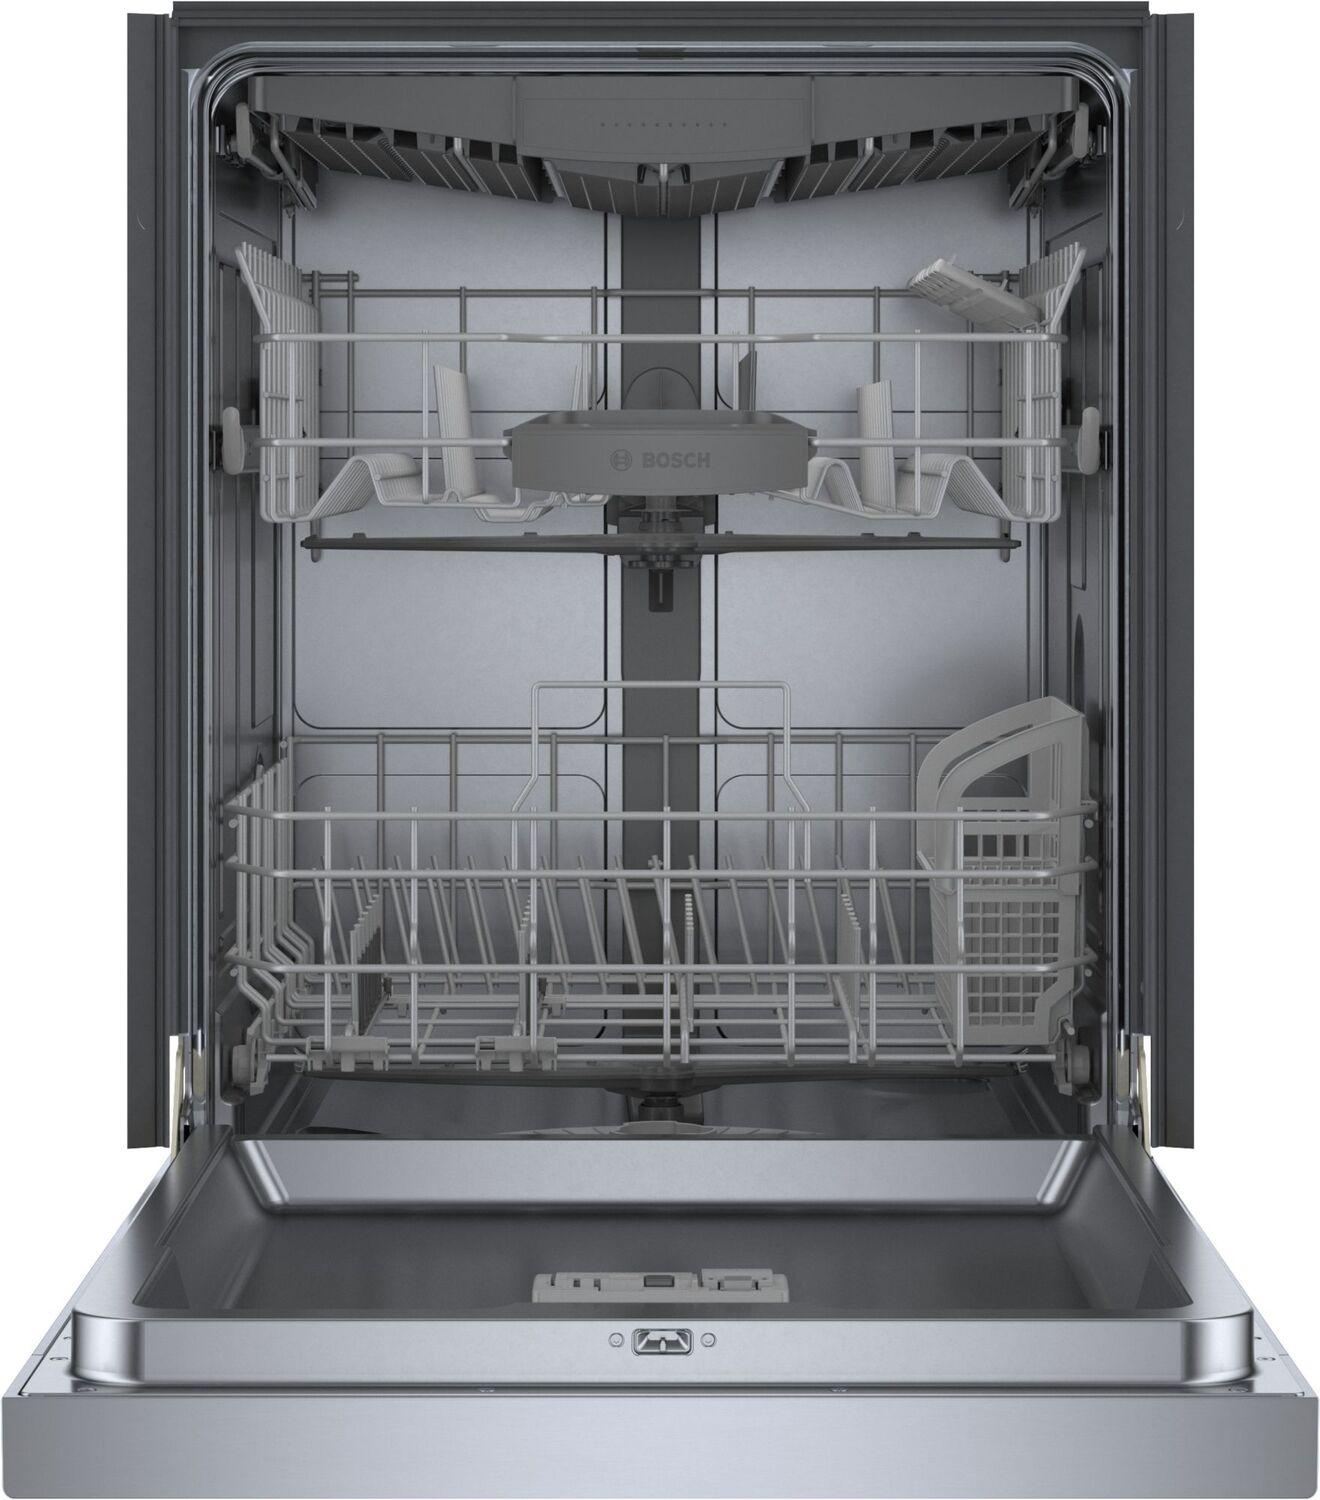 Bosch SHE53CE5N 300 Series Dishwasher 24" Stainless Steel